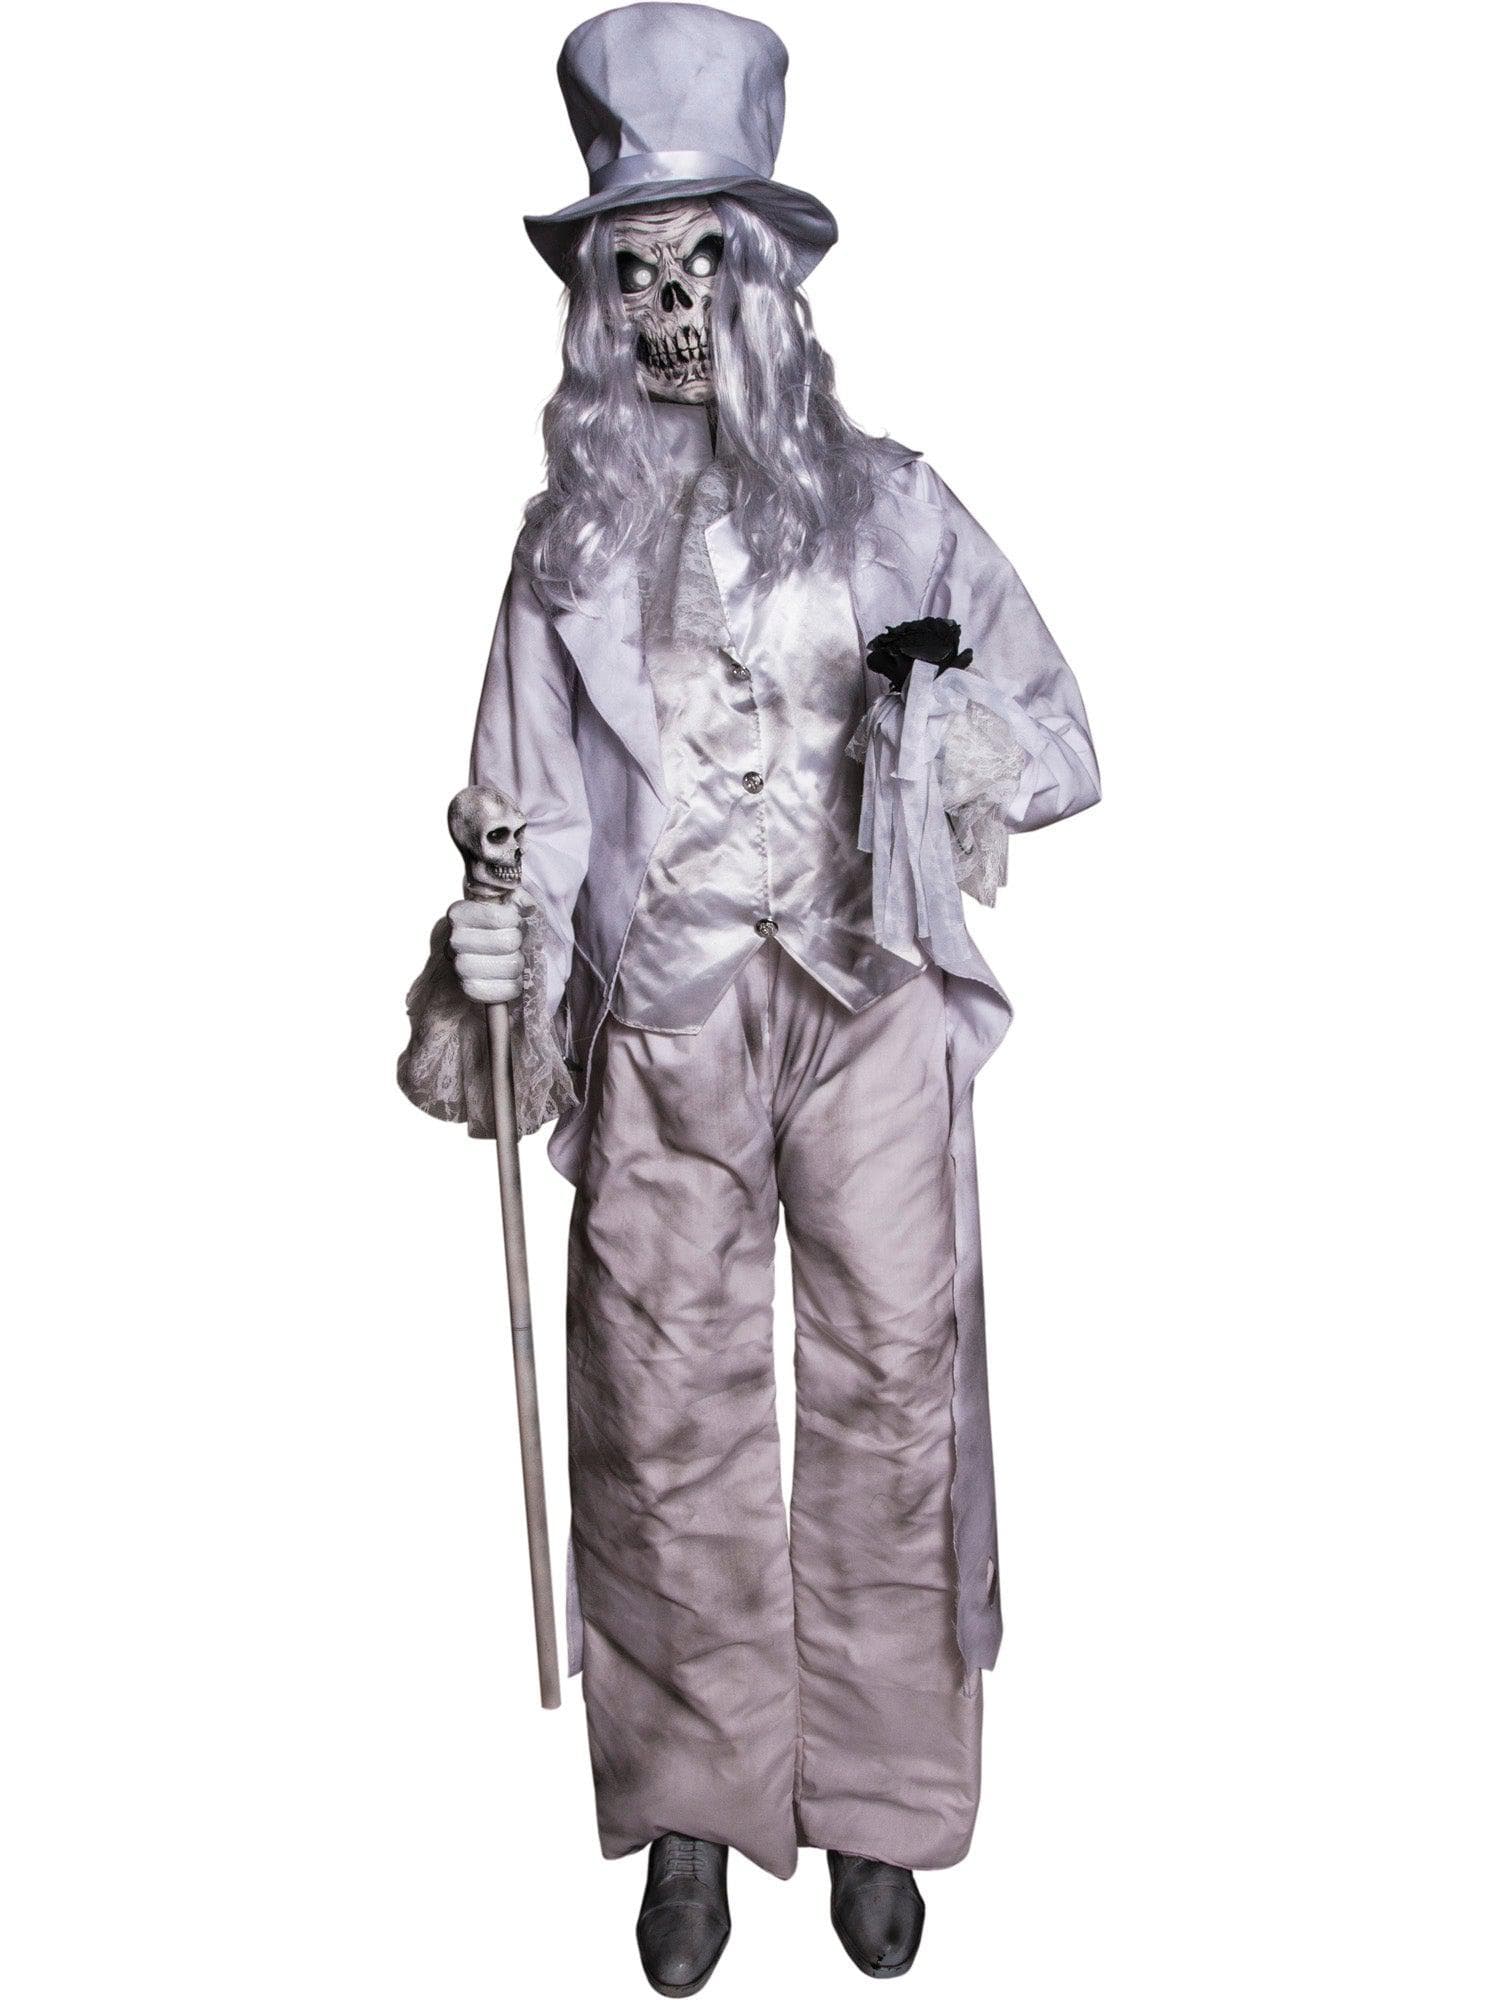 7 Foot Ghostly Gentleman Animated Decoration - costumes.com